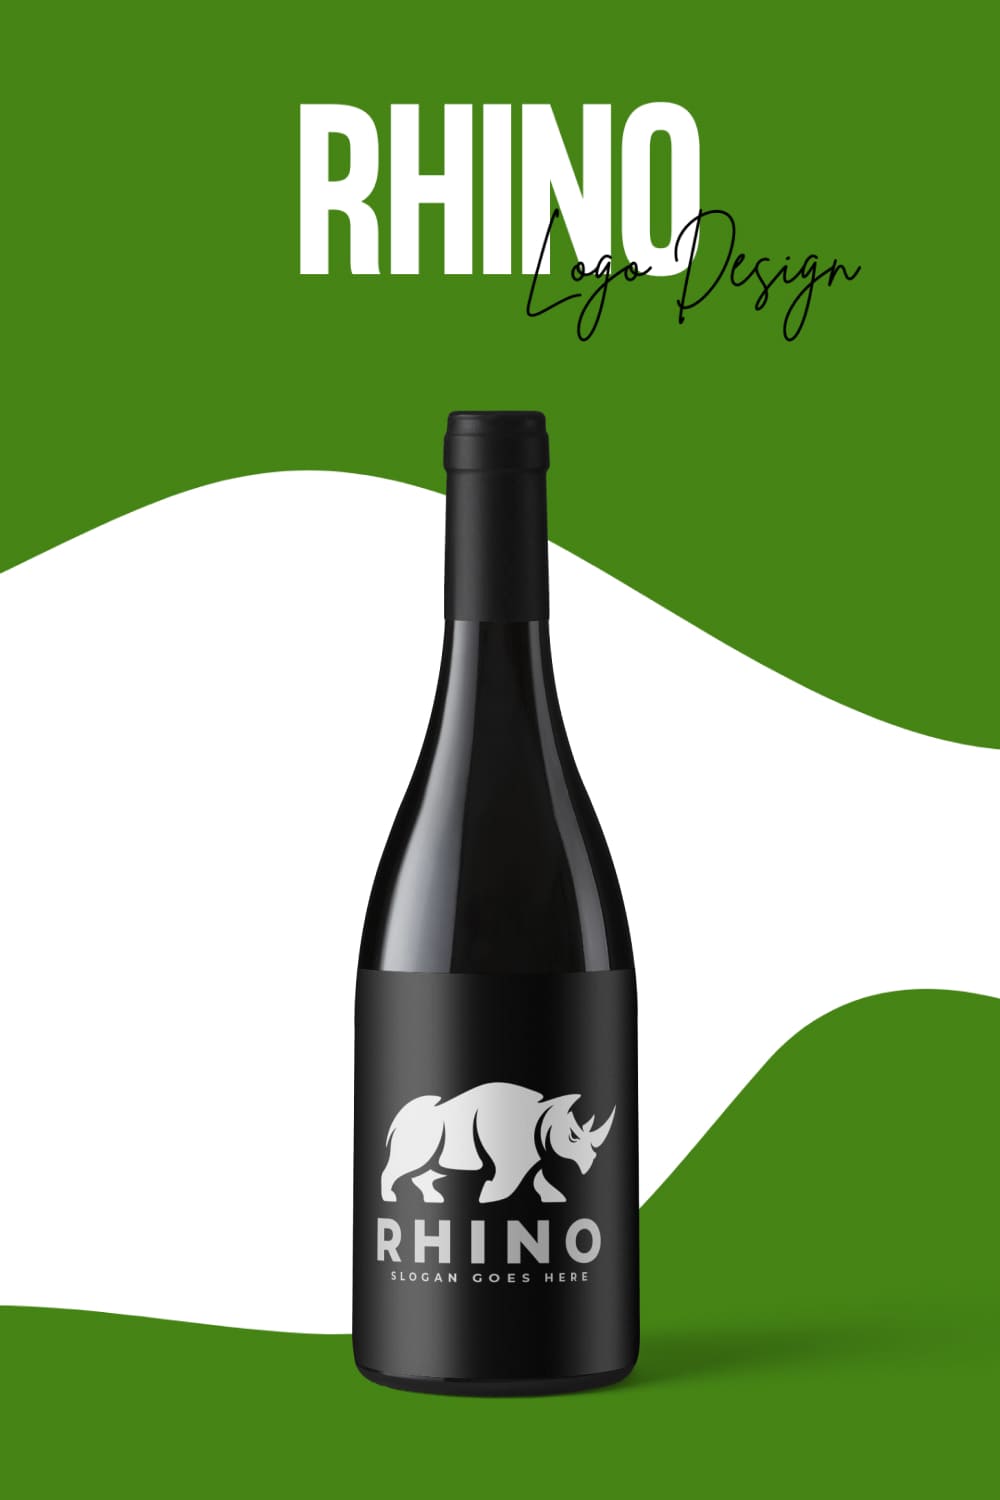 A picture of a bottle with a gorgeous rhino logo.